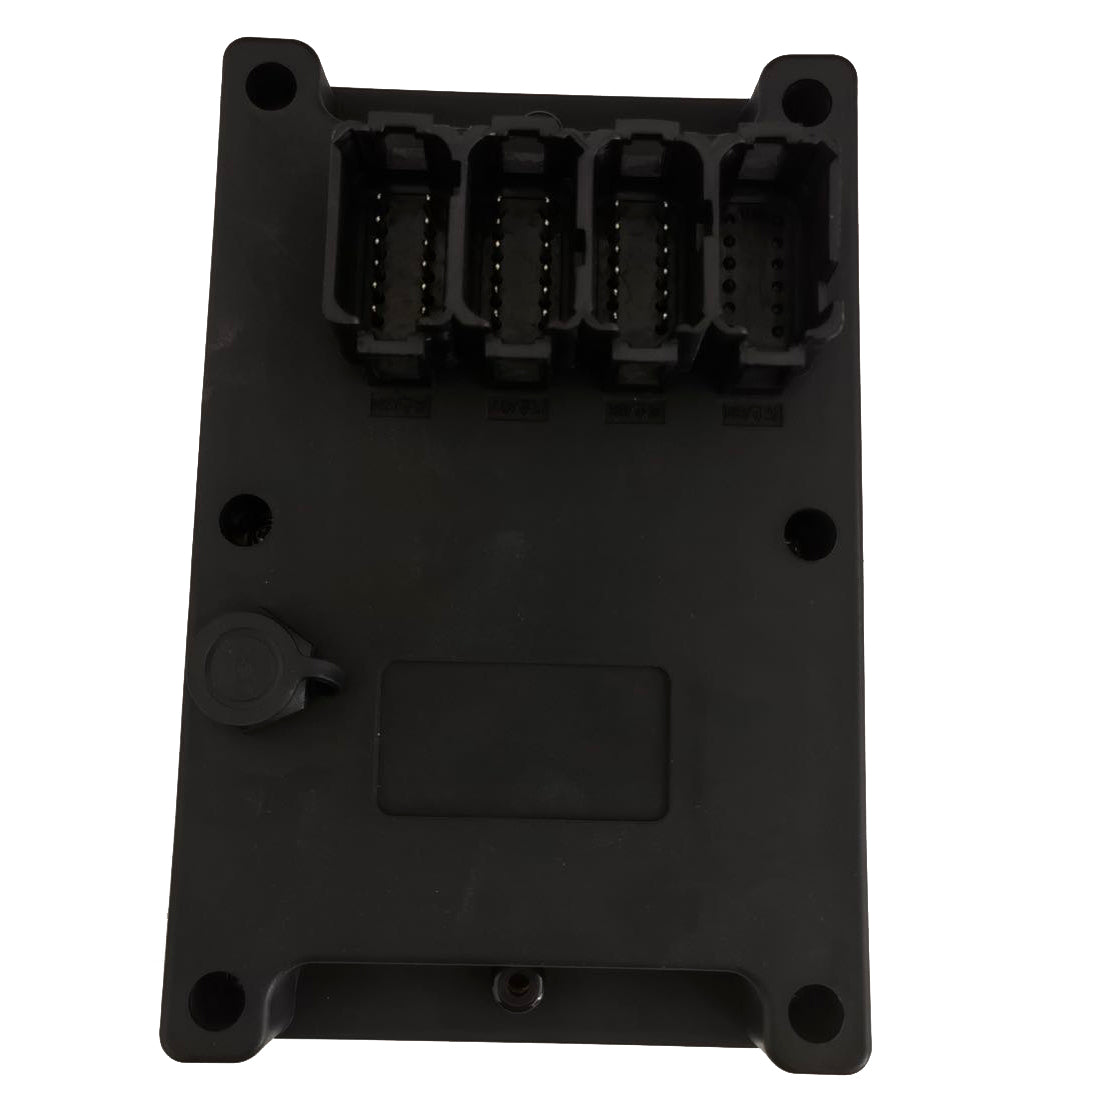 New 1256721GT Control Box Compatible with Genie GS-1530 GS-1532 GS-1930 GS-1932 GS-2032 GS-2046 GS-2632 GS-2646 GS-2669 GS-3246 GS-3369